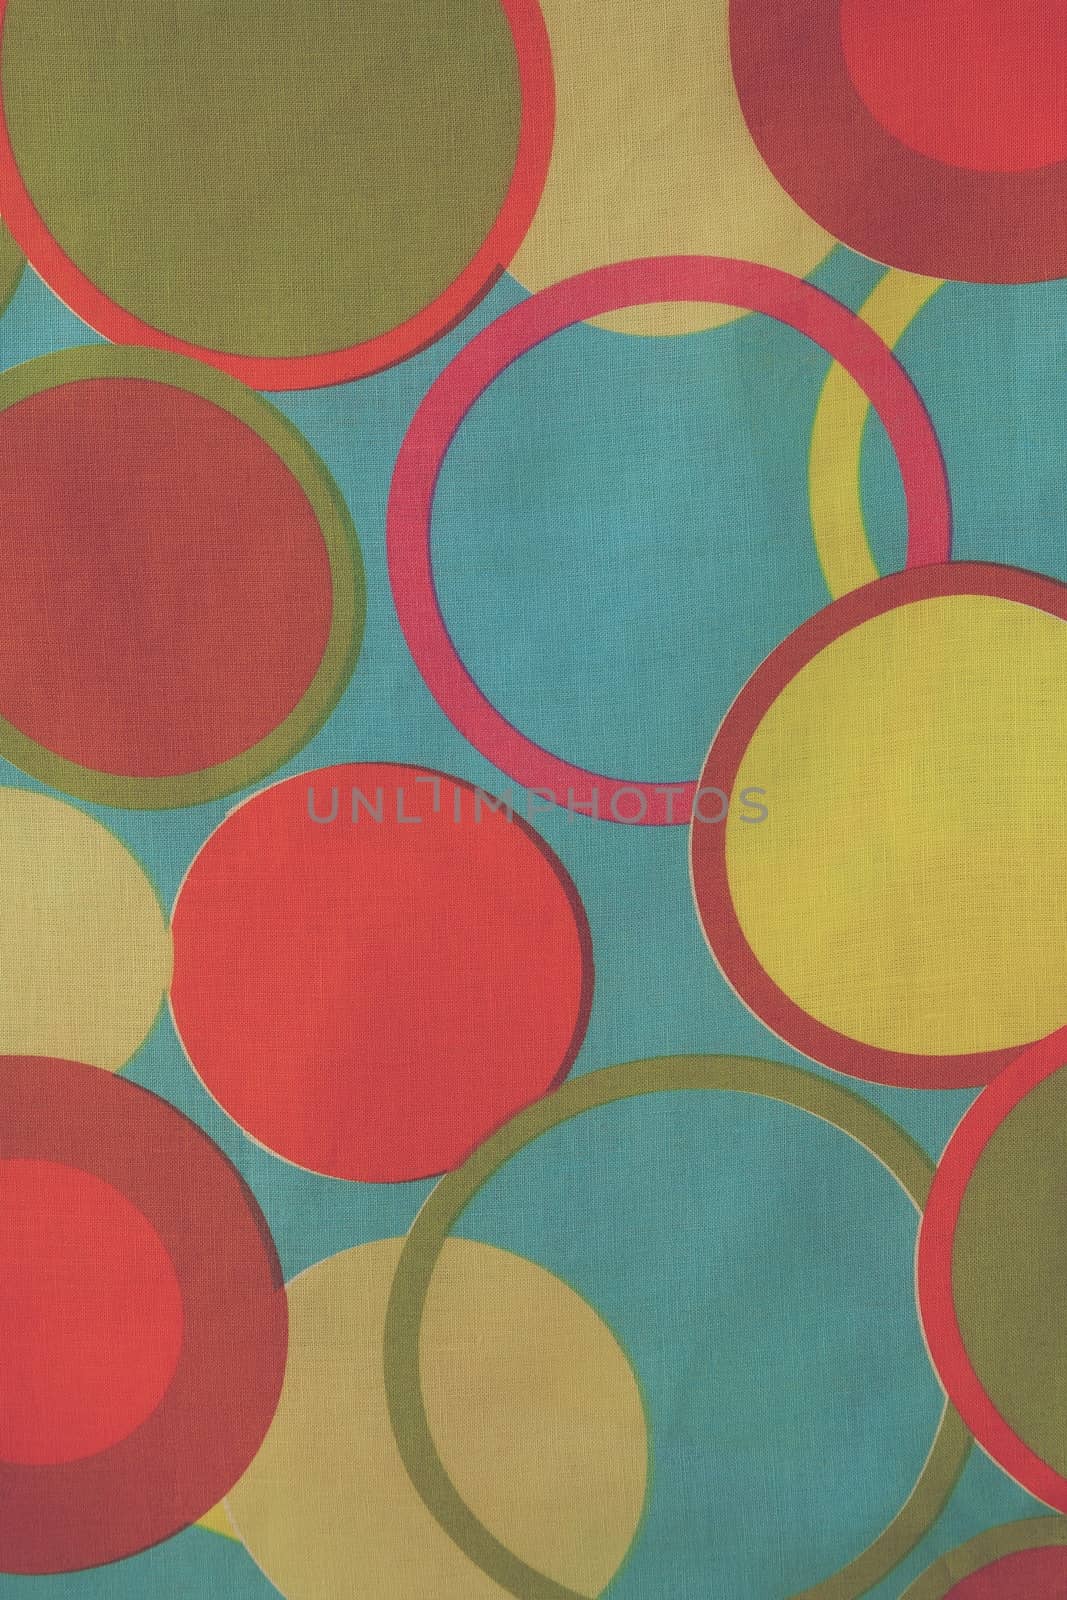 Circles on a colorful fabrics by tolikoff_photography